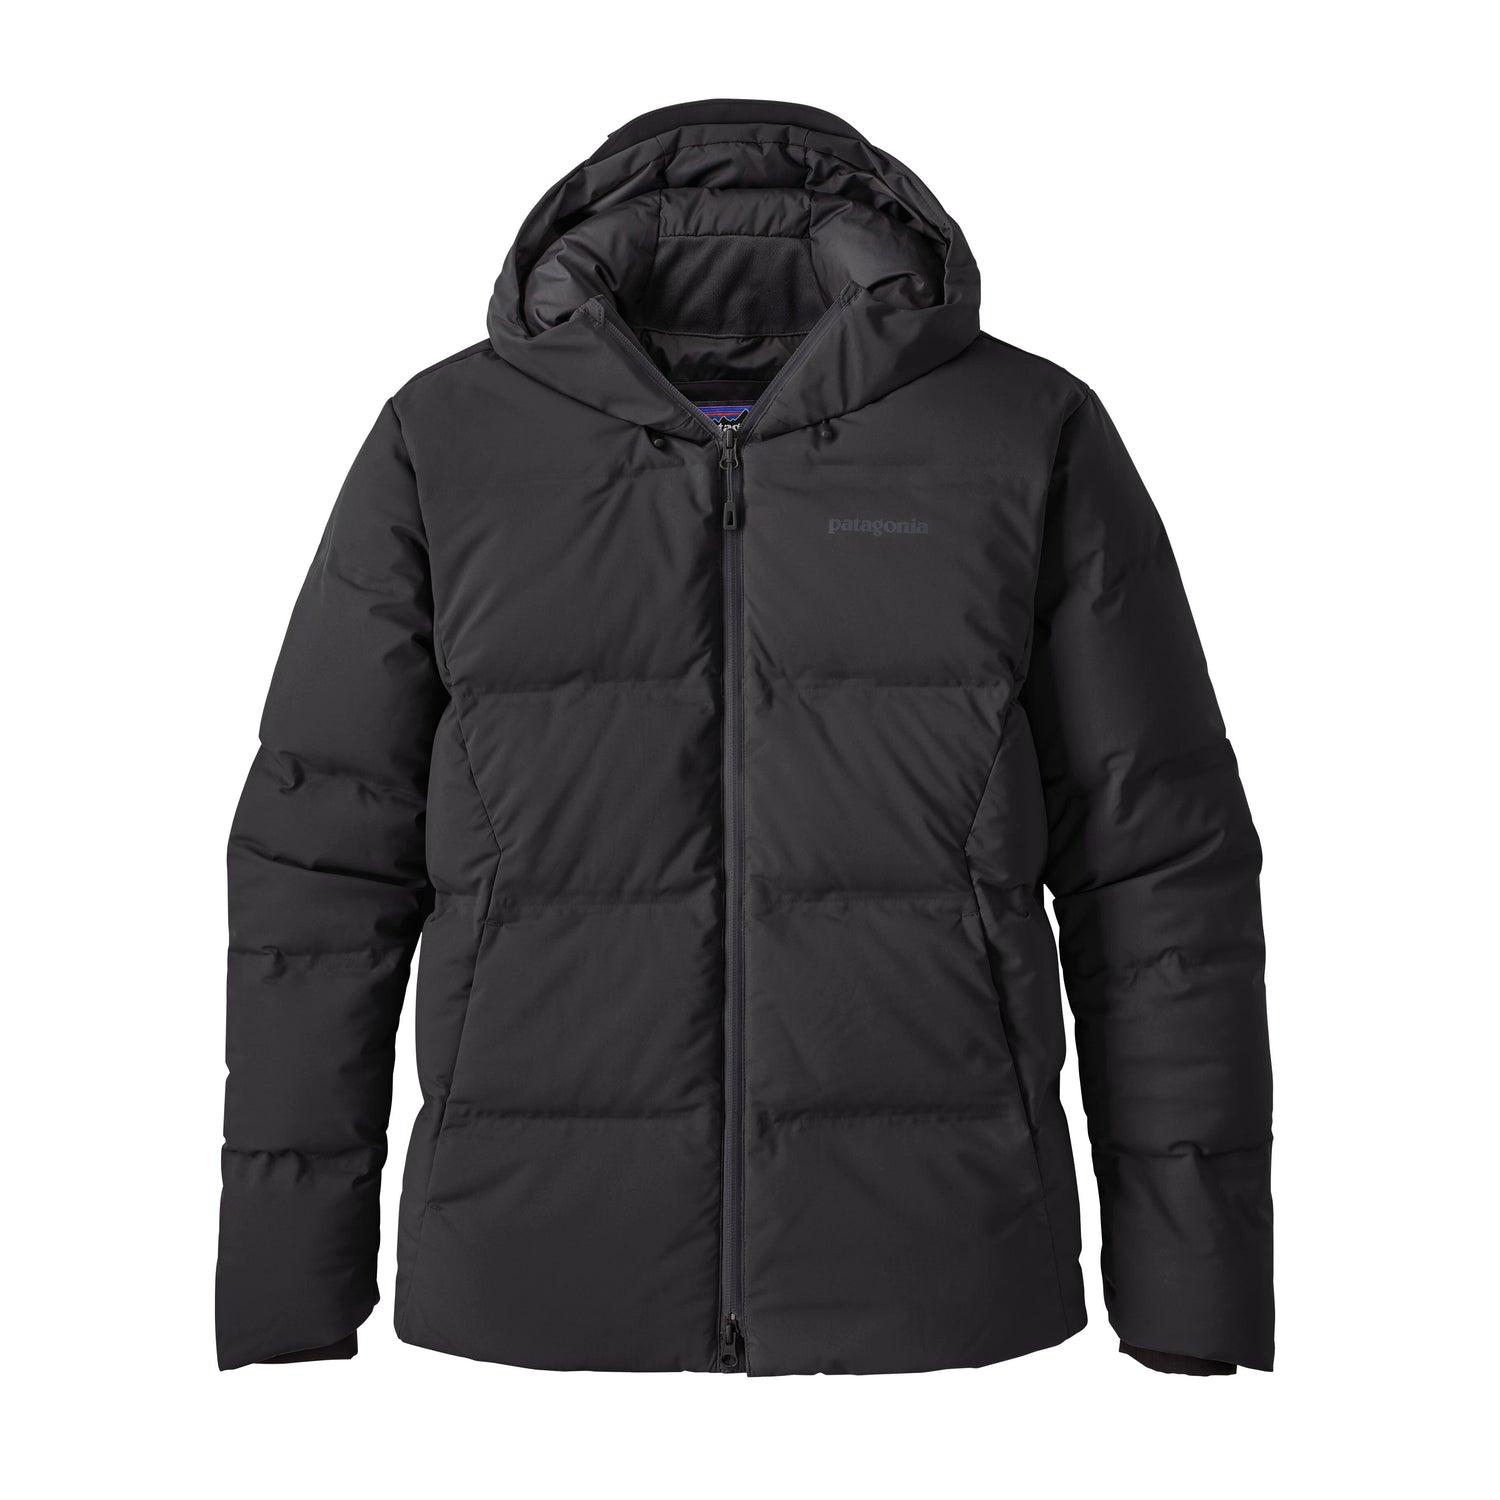 Patagonia M's Jackson Glacier Jacket - Recycled Down & Recycled Polyester Black Jacket